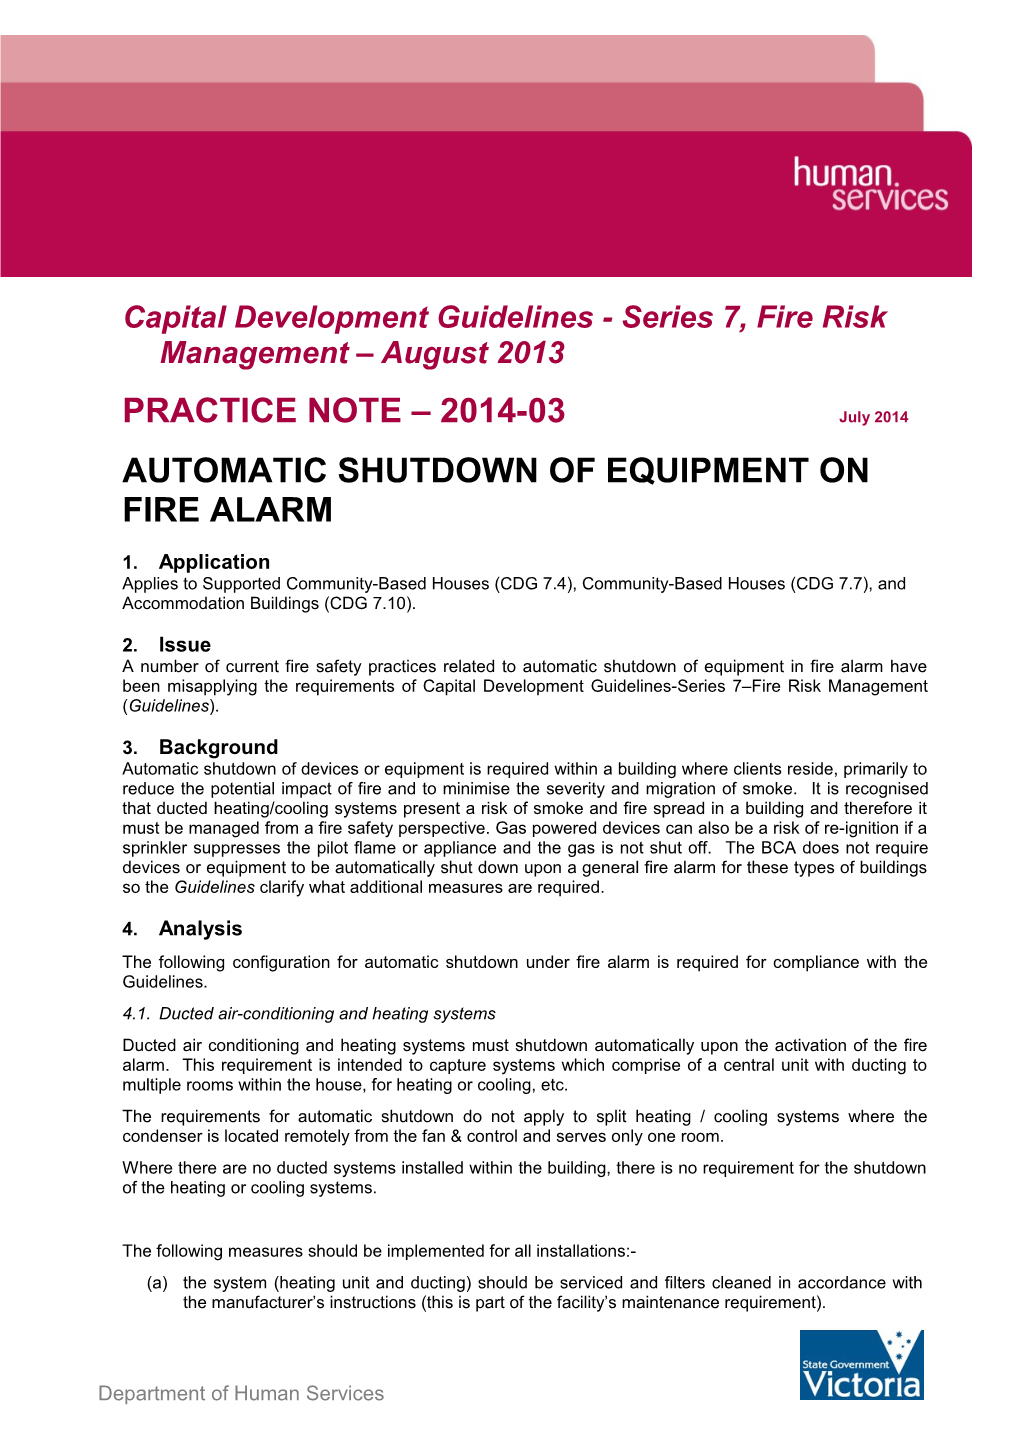 Practice Note 2014-03-Automatic Shutdown of Equipment on Fire Alarm